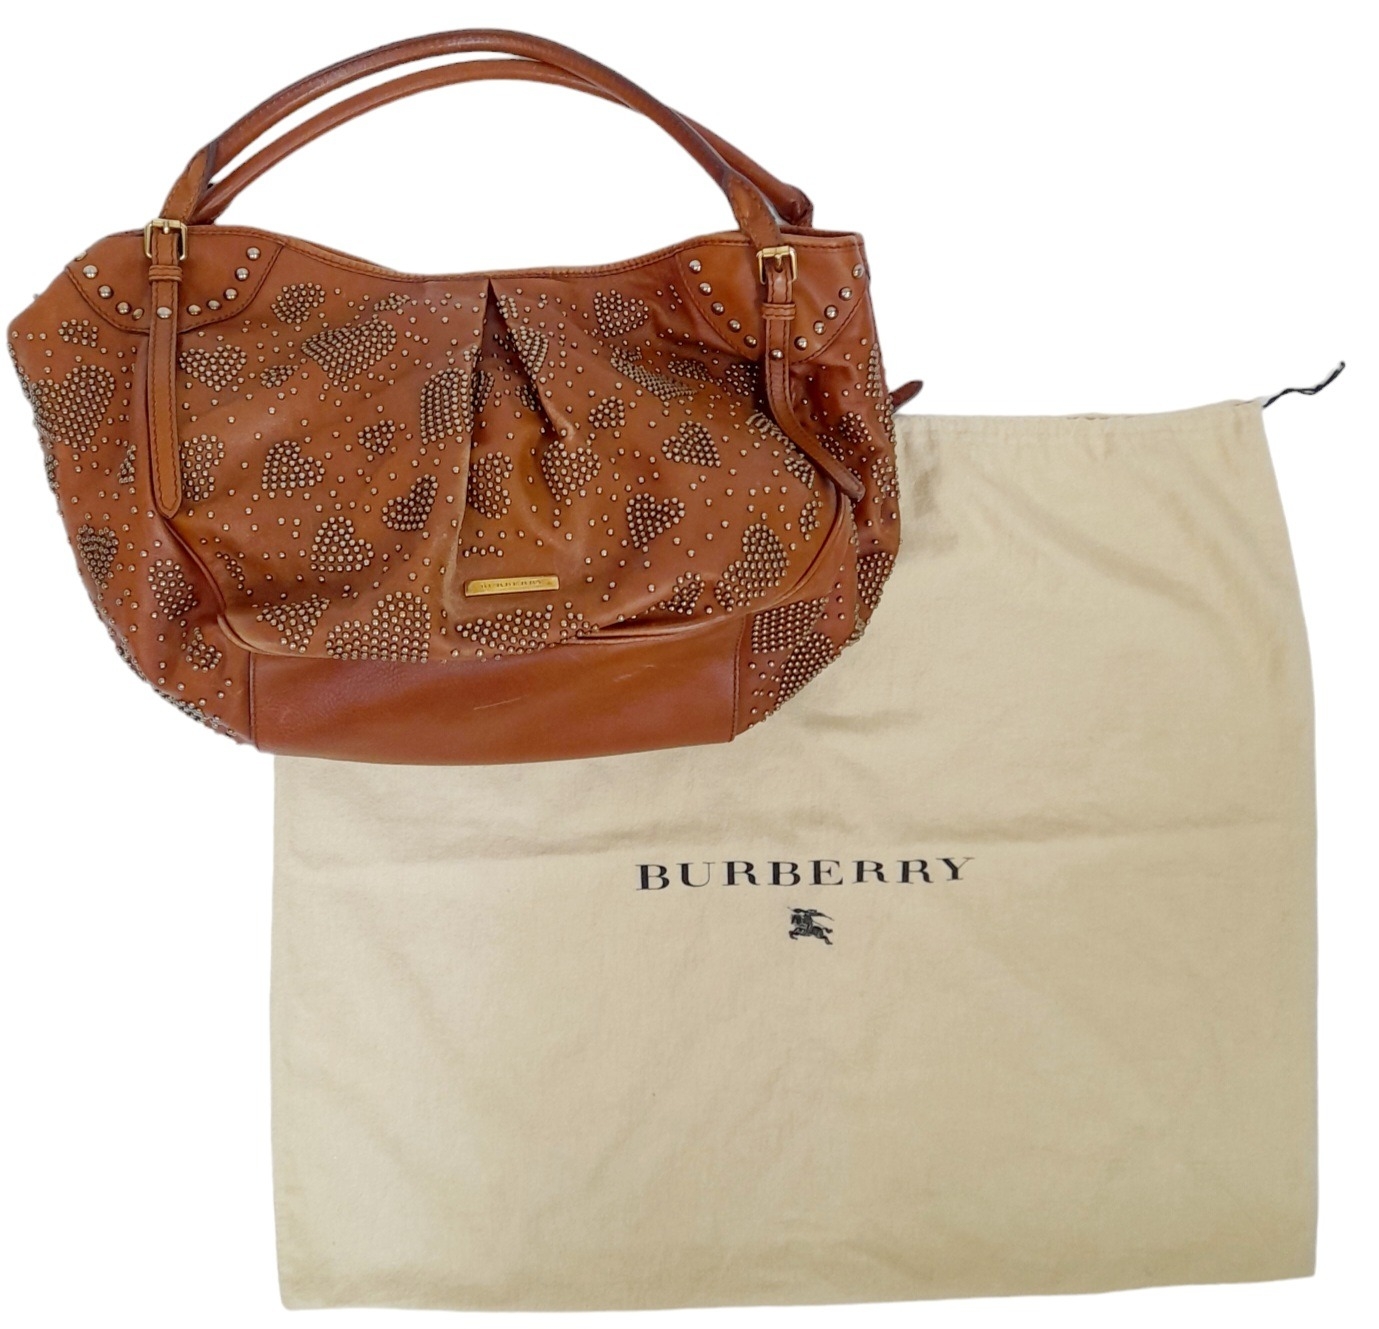 A Burberry Tan Studded Heart Hobo Bag. Leather exterior with stud embellishments, golden-toned - Image 4 of 8